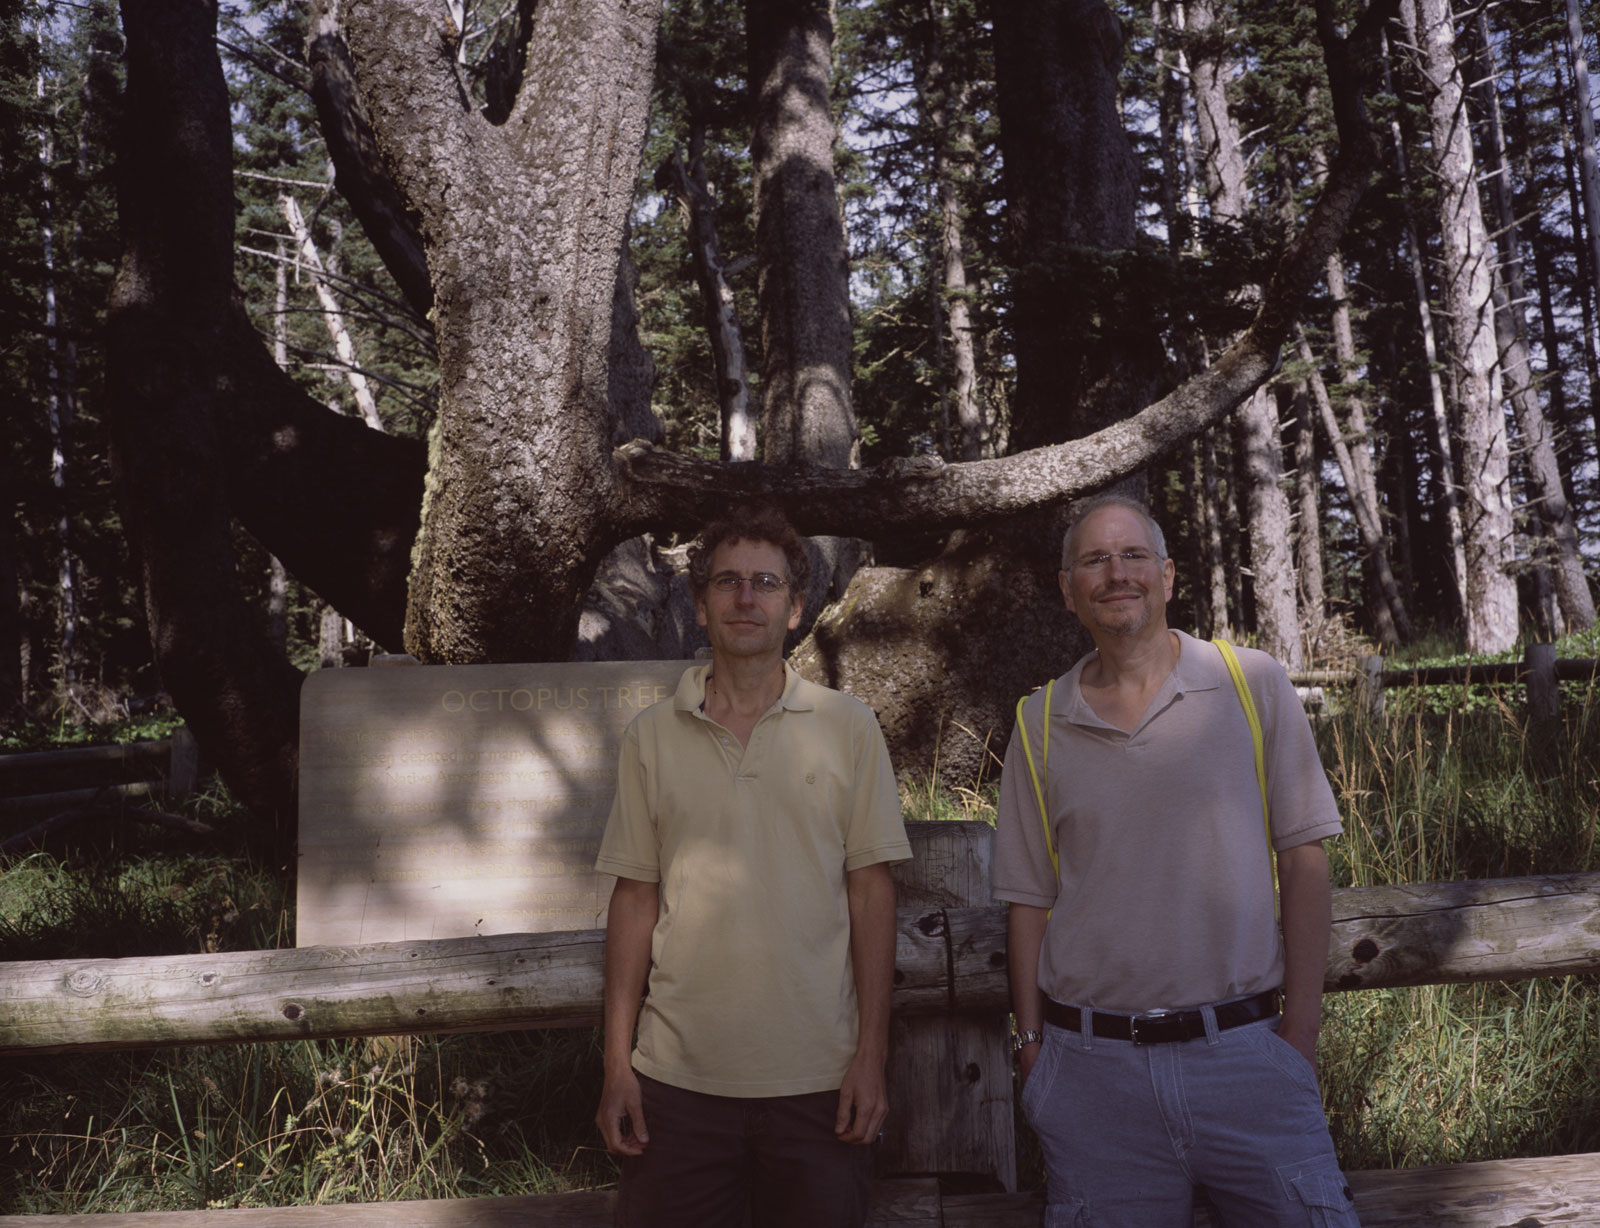 Dan and Marc standing before the Octopus Tree at Cape Meares State Park along the Oregon coast